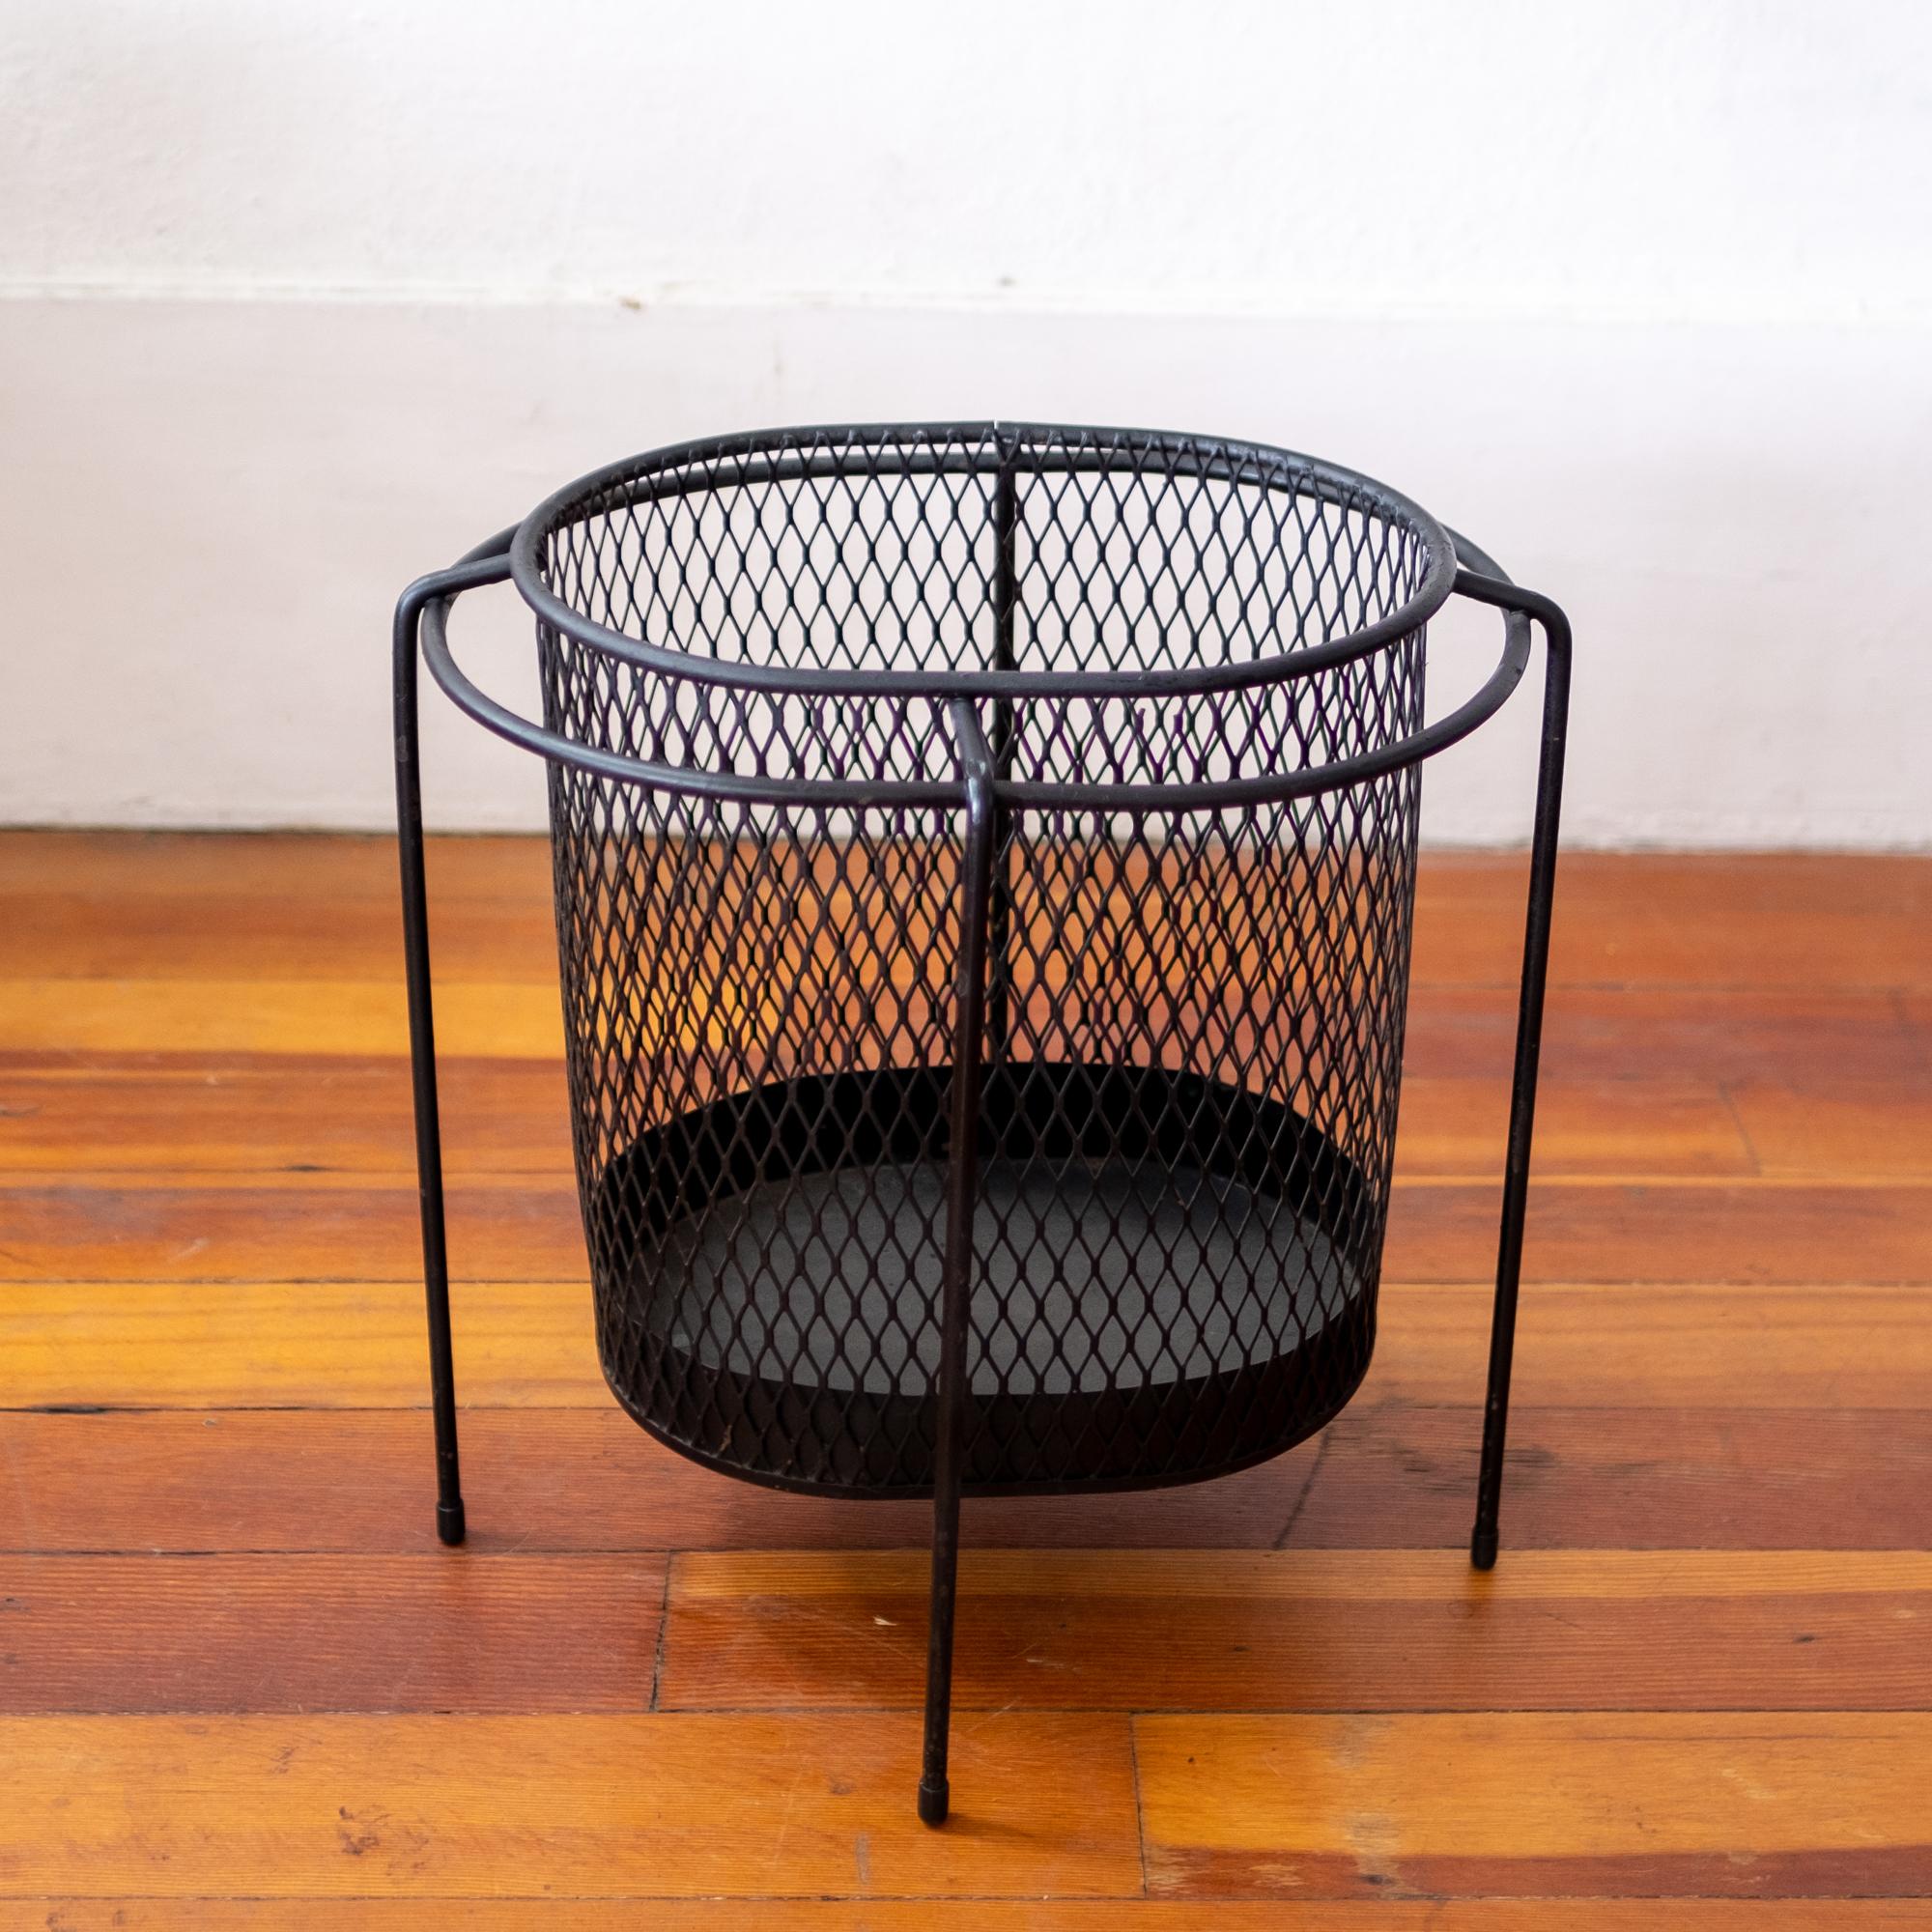 Mid-20th Century Midcentury Iron and Expanded Metal Waste Basket